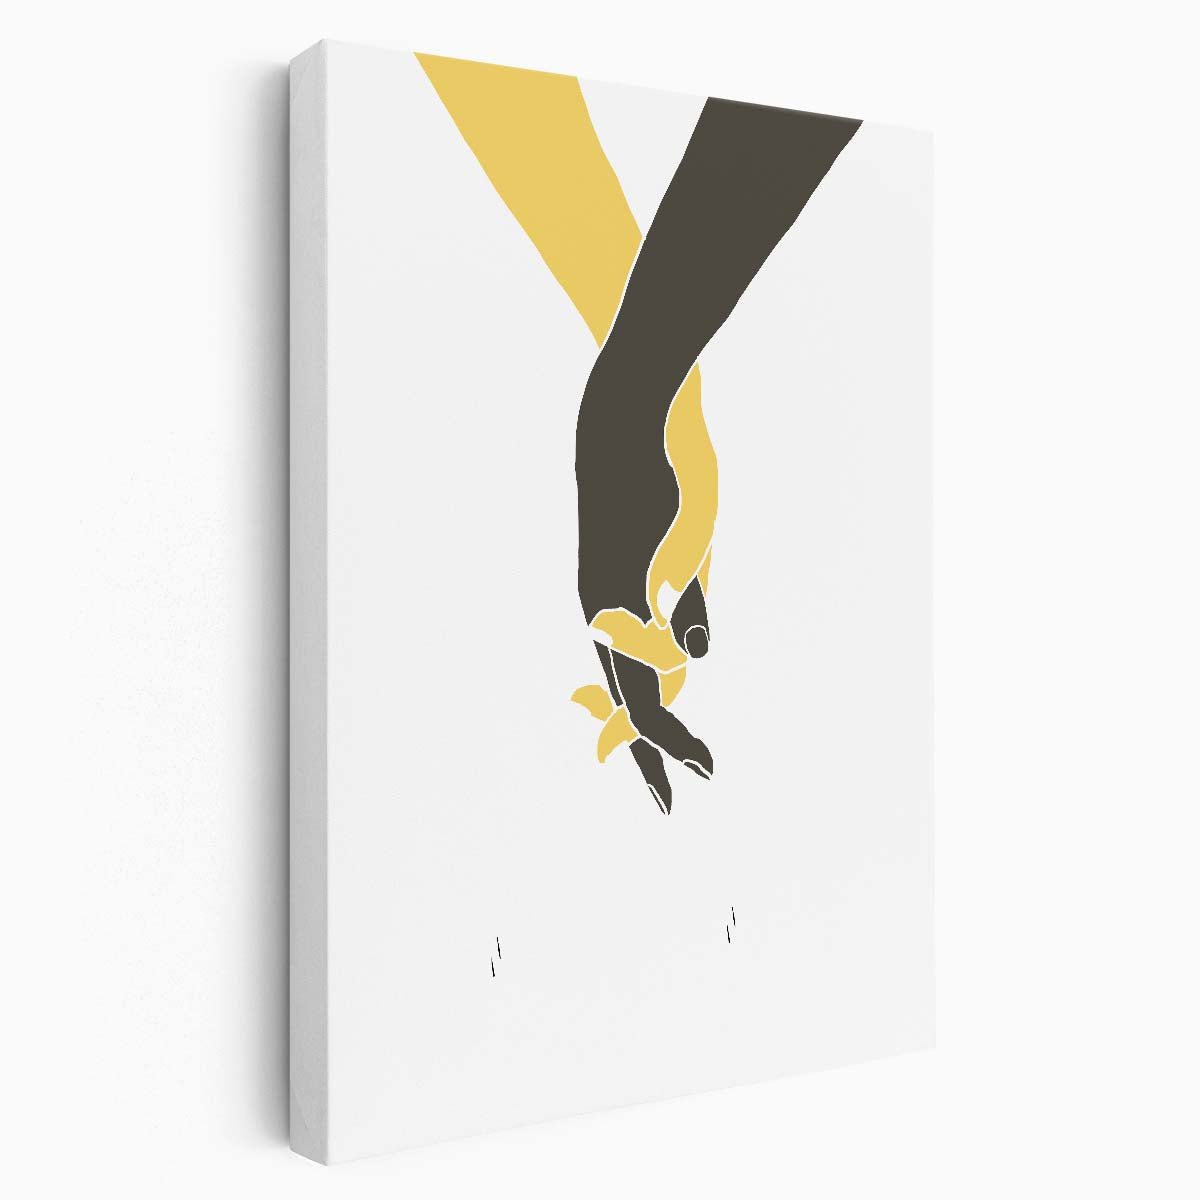 Romantic Minimalistic Illustration of Couple Holding Hands, Mid-Century Art by Luxuriance Designs, made in USA